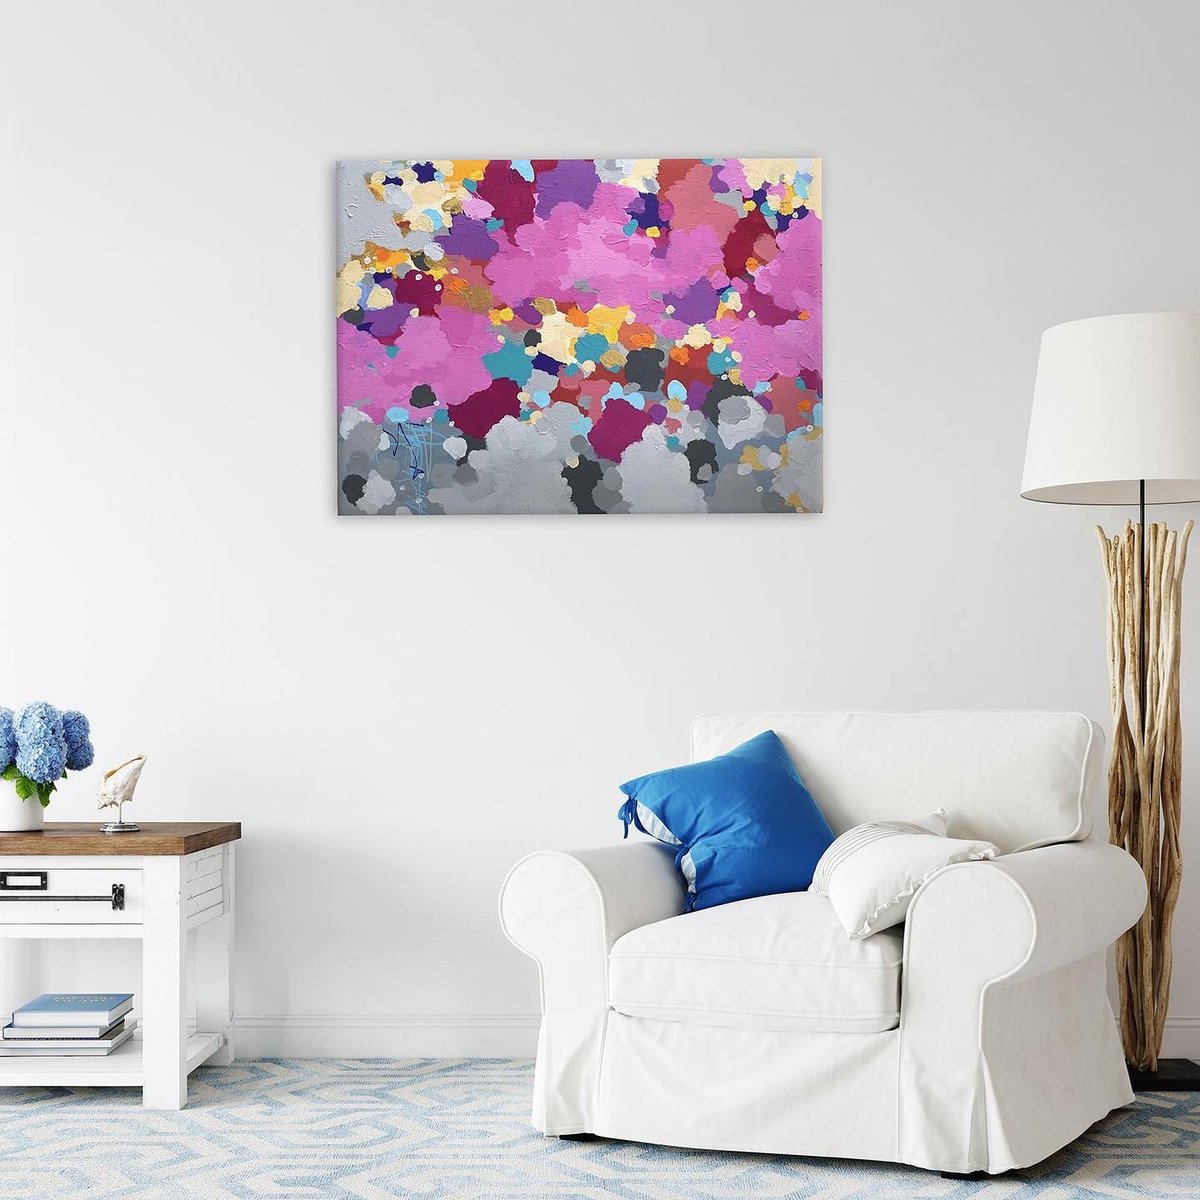 This painting is called “Transitions.” 

He has made everything beautiful in its time. He has also set eternity in the human heart; yet no one can fathom what God has done from beginning to end. -Ecclesiastes 3:11
.
.
 #interiordesignart #artforsale #artforyourhome #abstractpaint